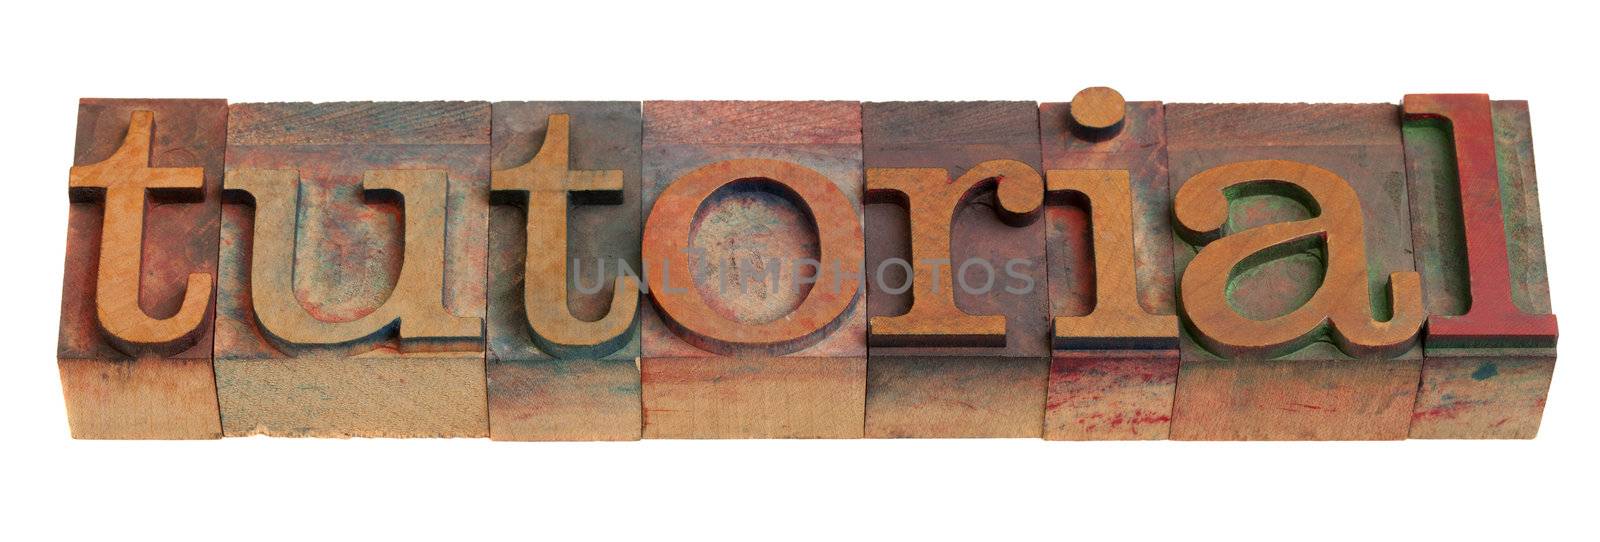 tutorial - word in vintage wooden letterpress printing blocks isolated on white